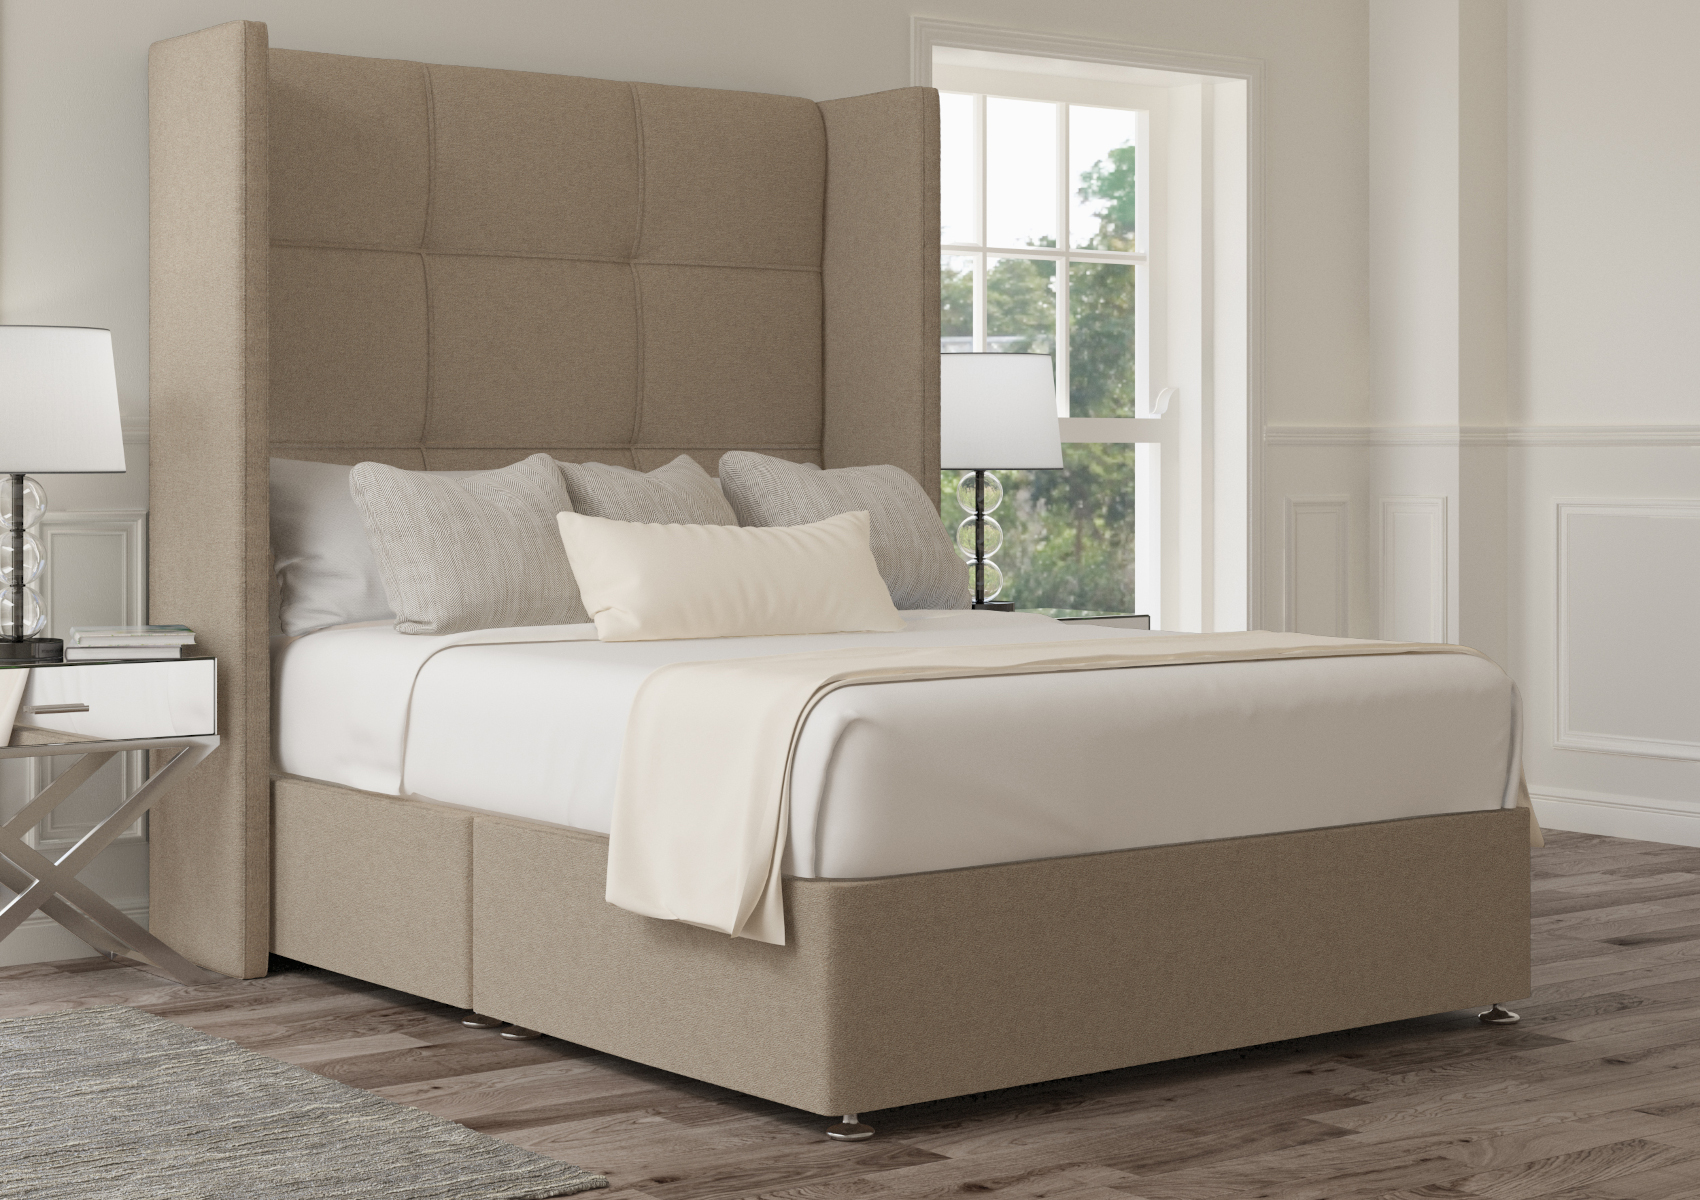 View Oaklyn Arran Natural Upholstered Double Winged Bed Time4Sleep information